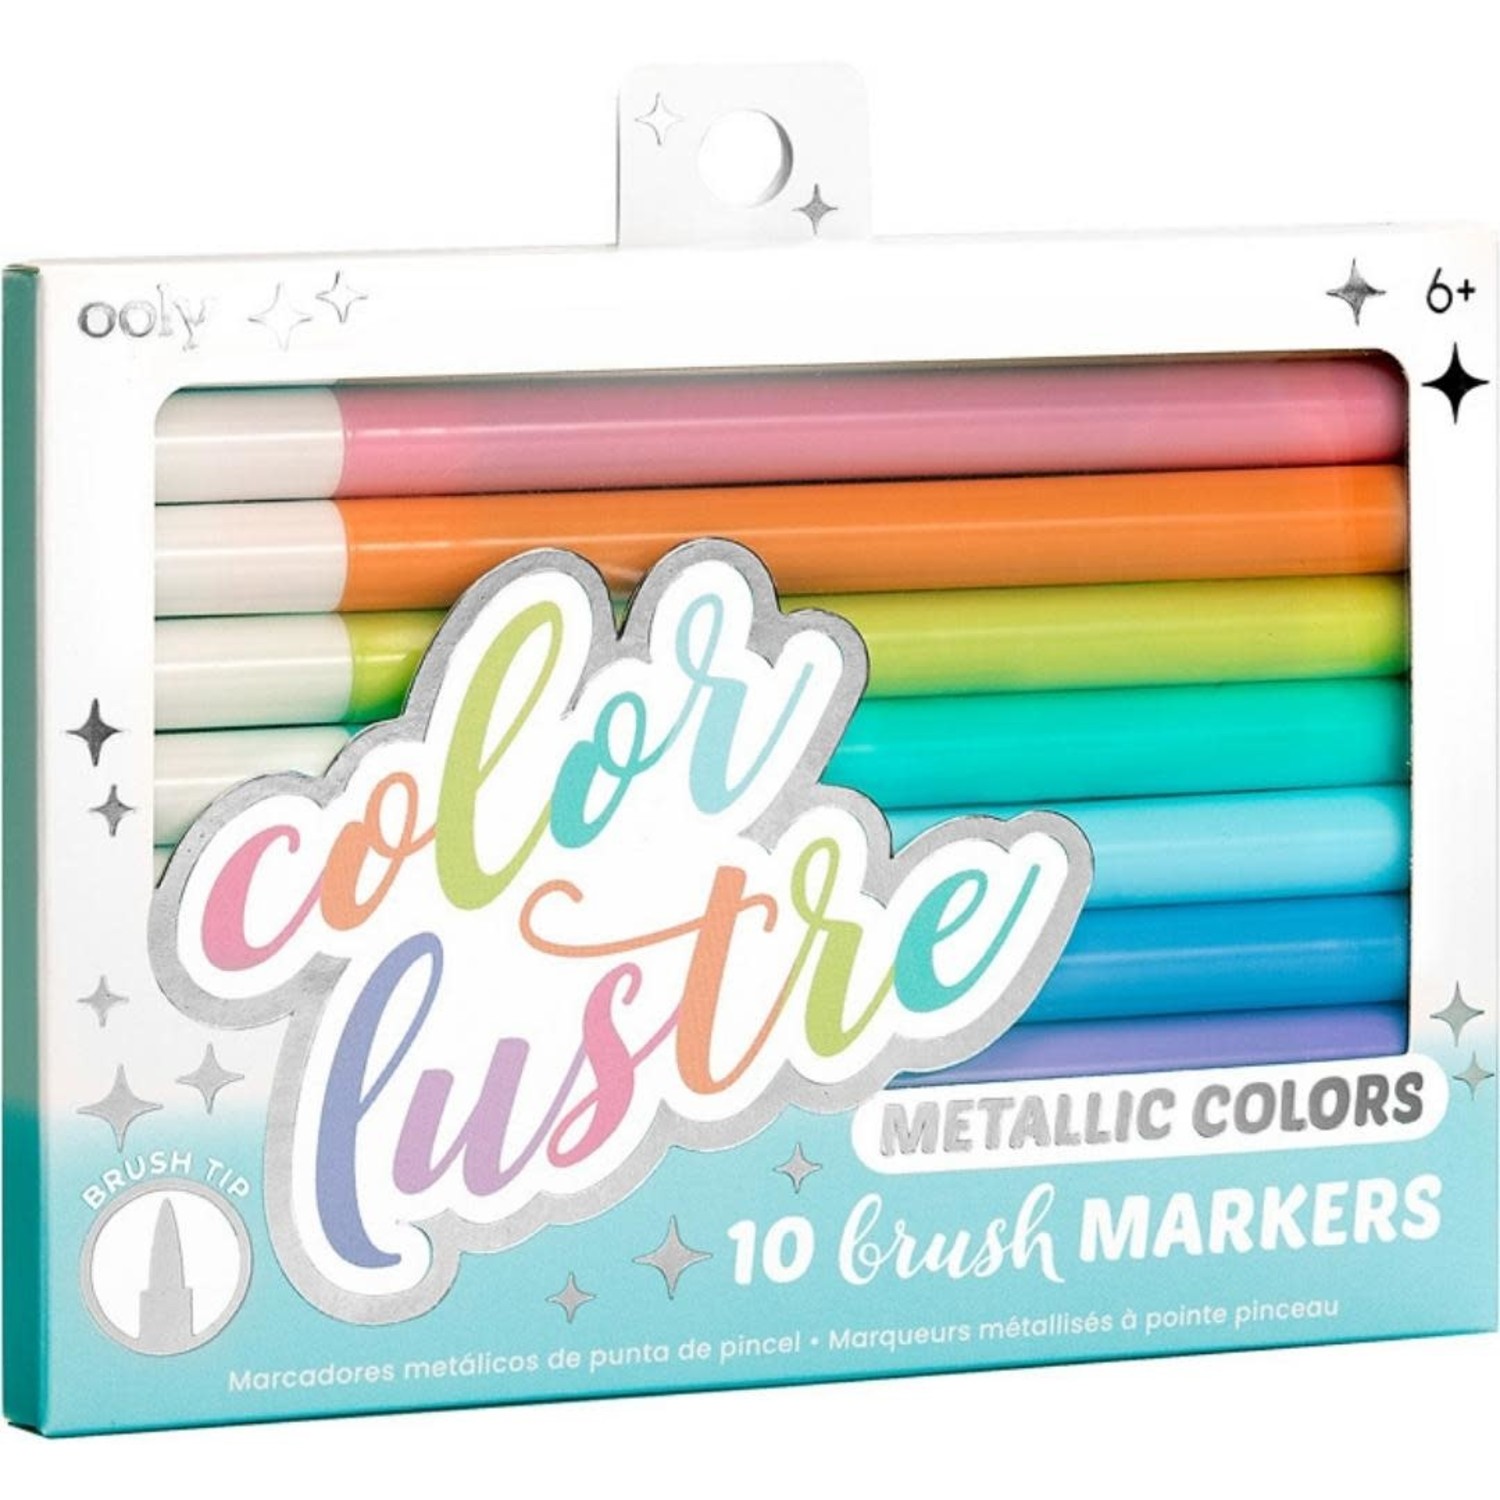 Ooly Color Lustre Metallic Brush Markers Set of 10